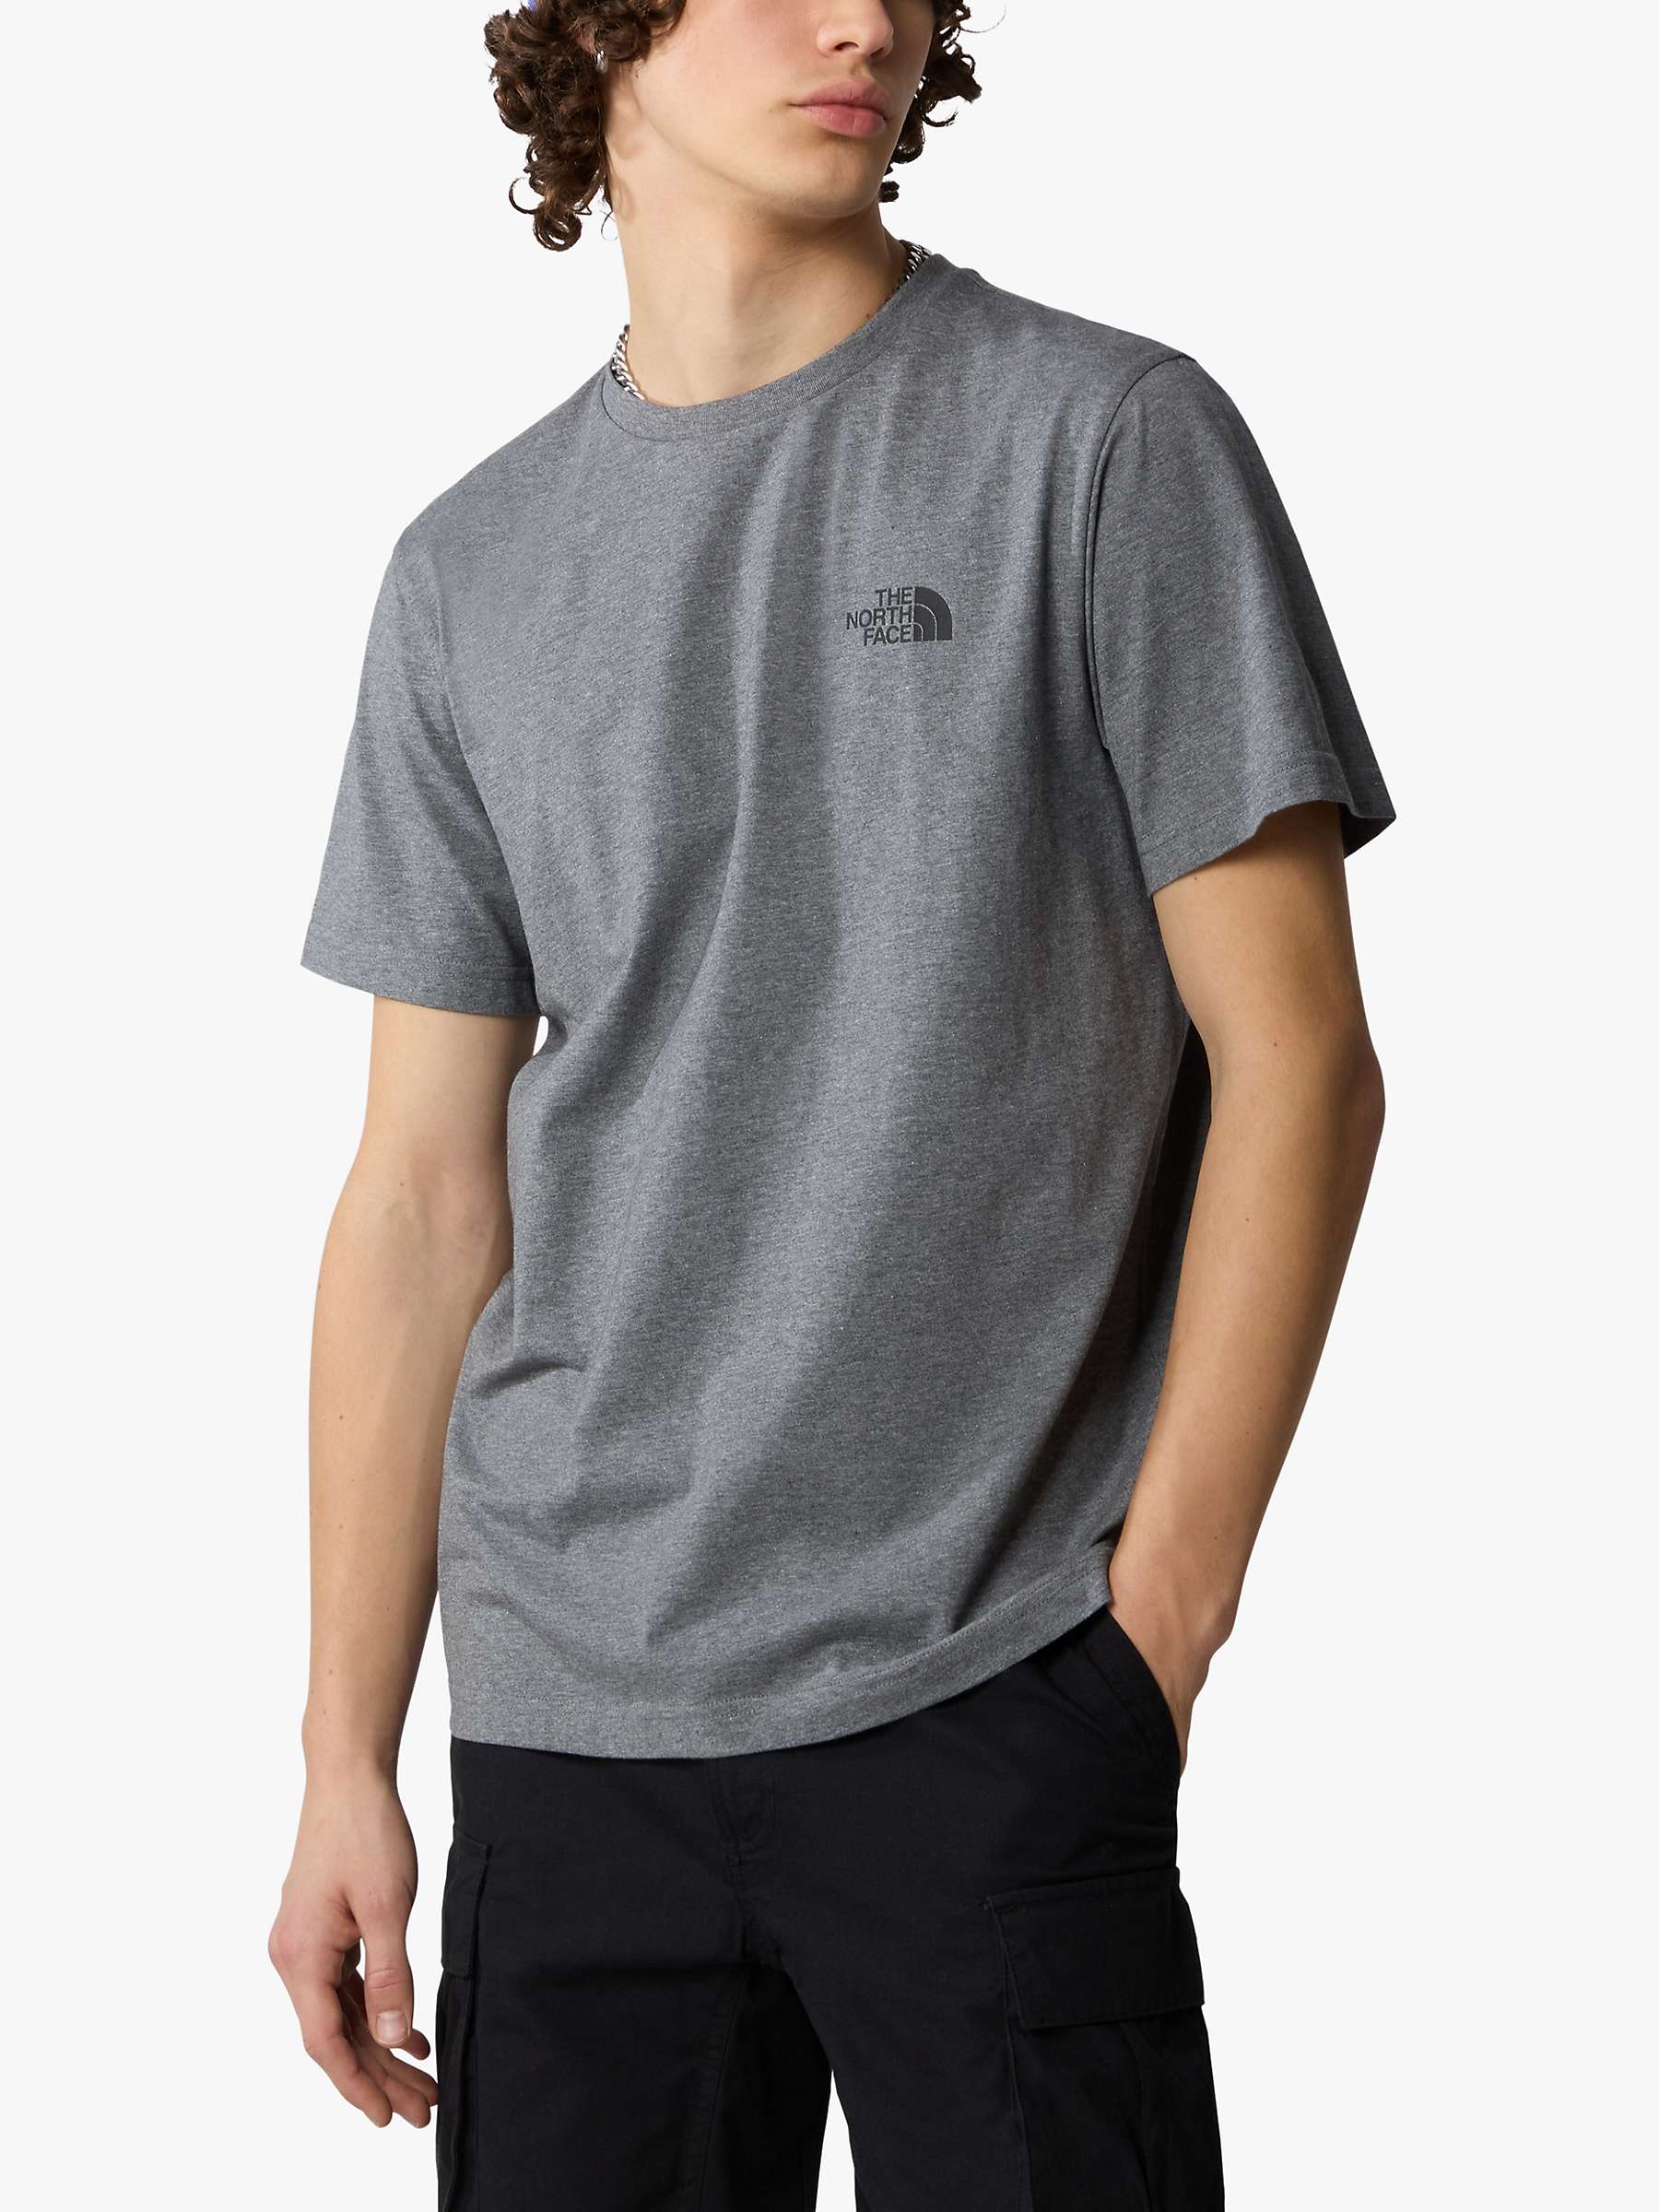 Buy The North Face Dome Short Sleeve T-Shirt, Grey Heather Online at johnlewis.com